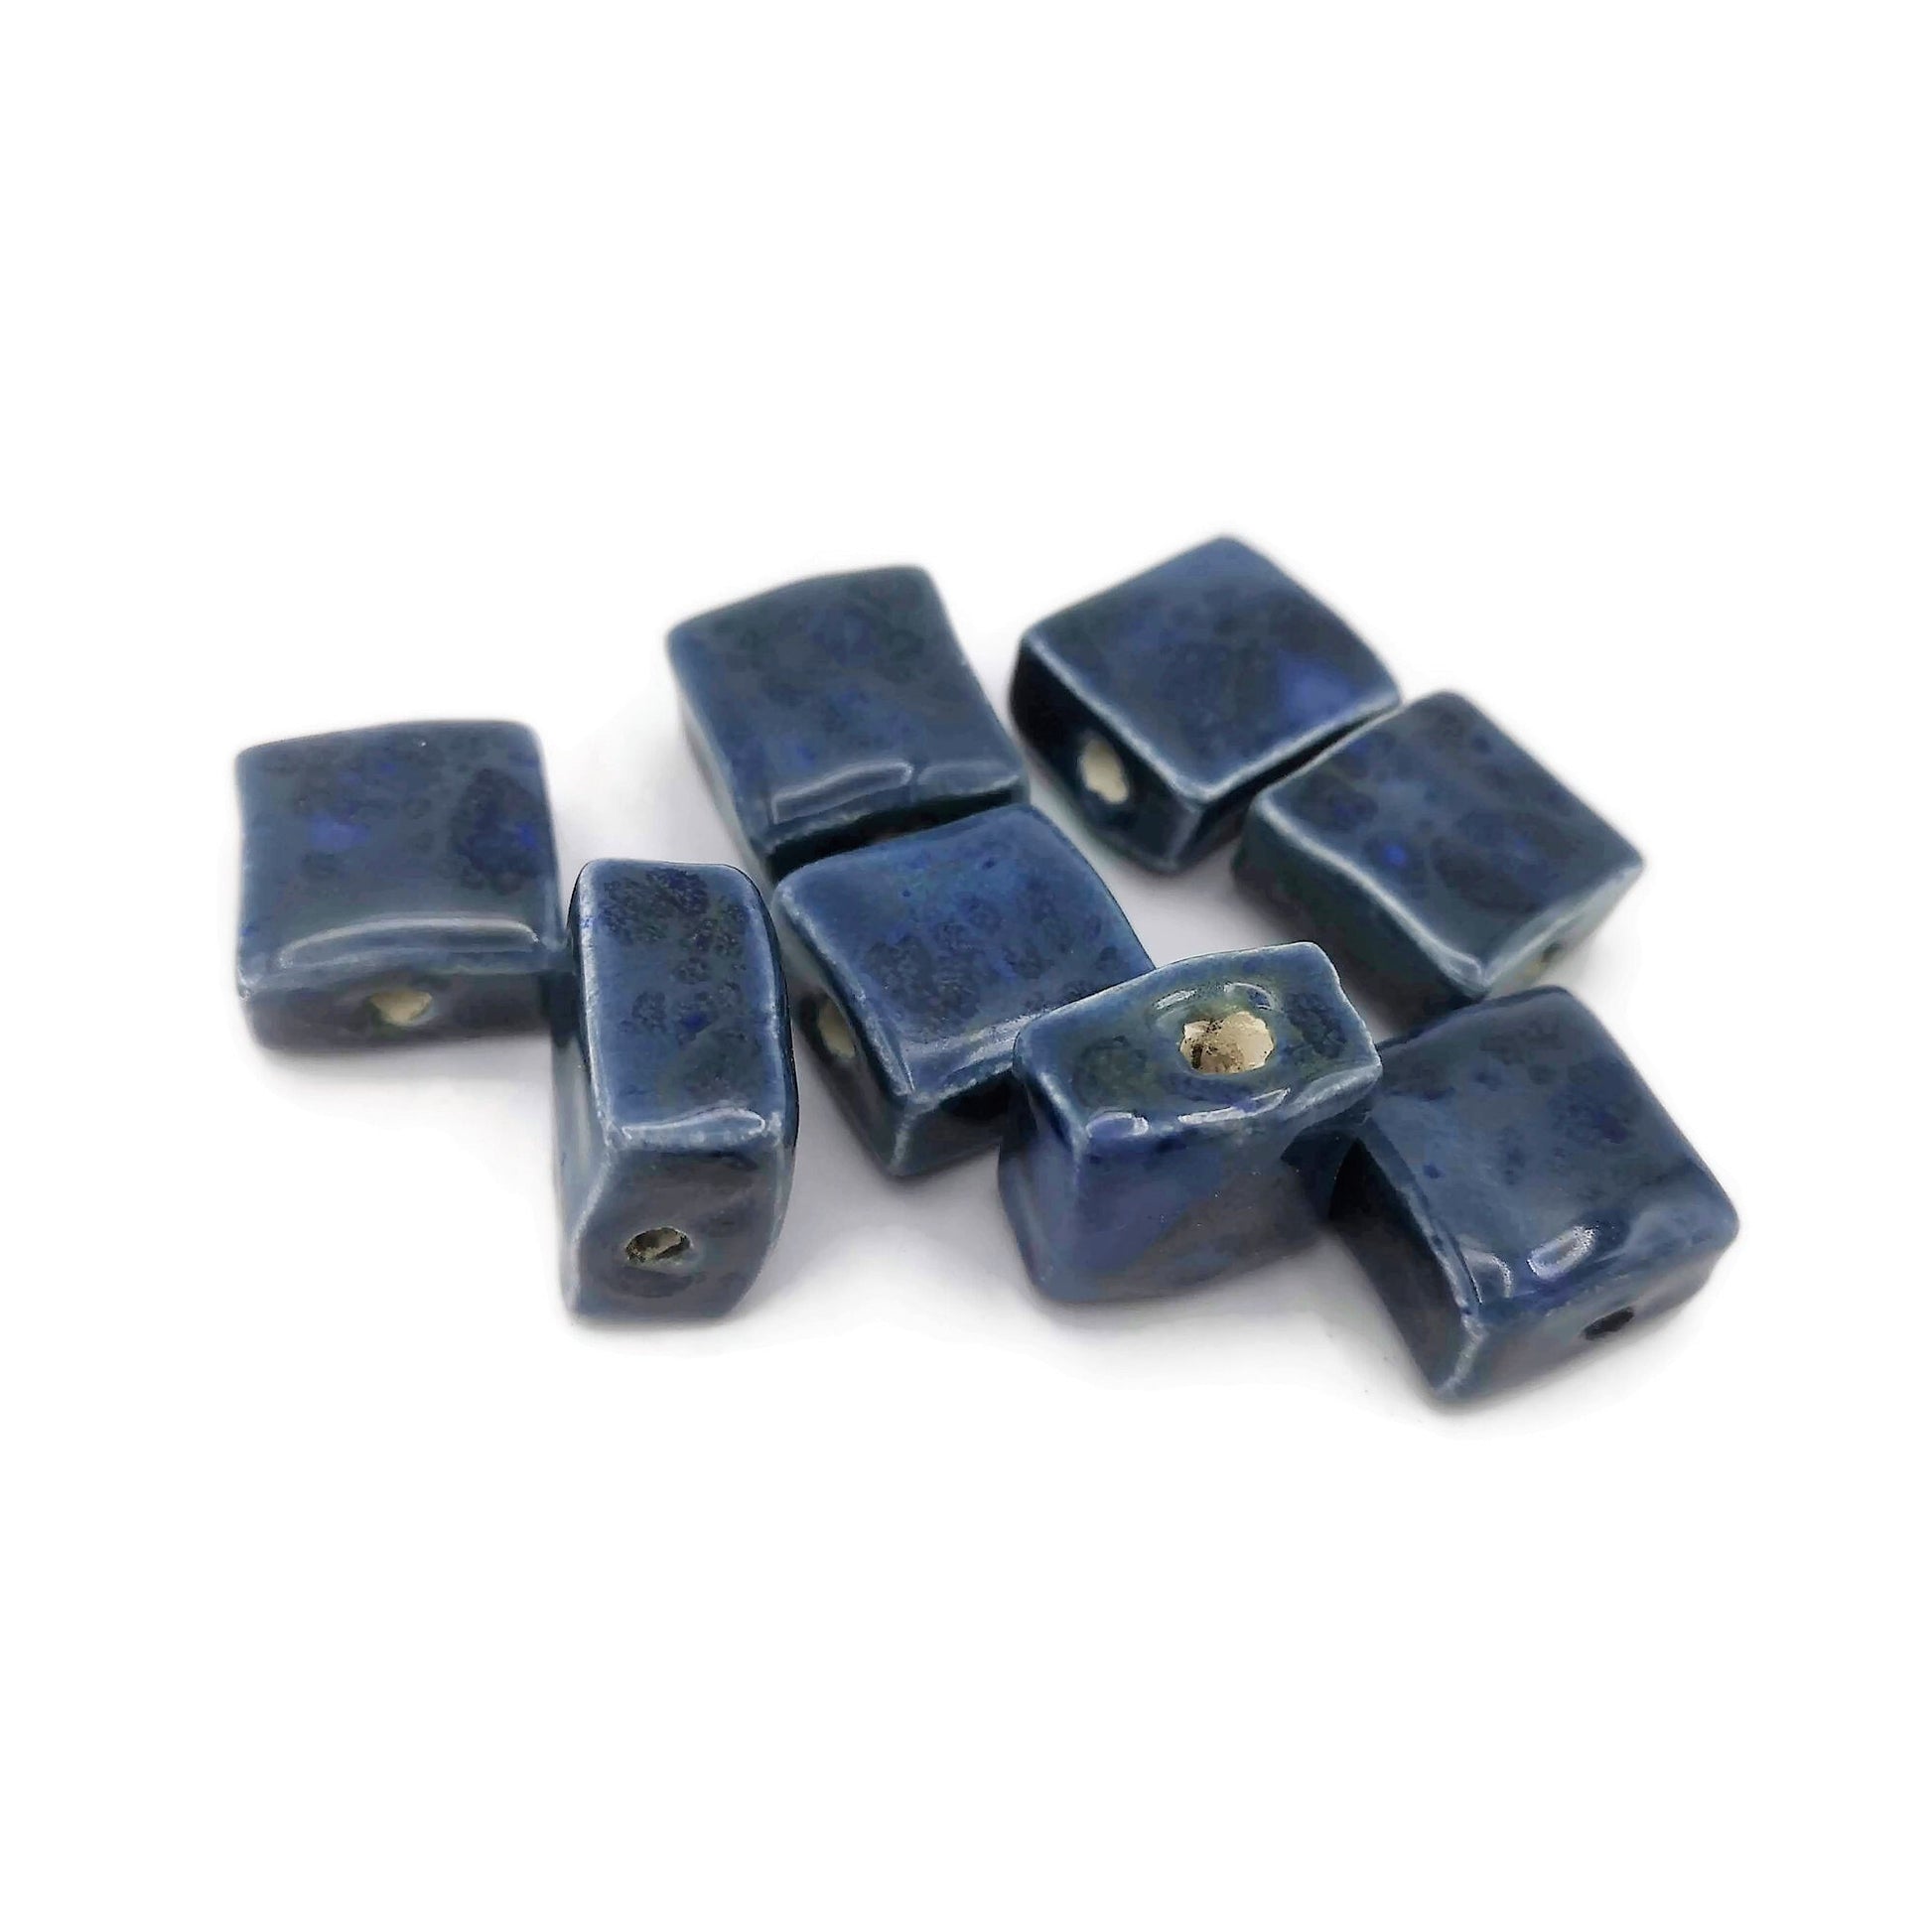 8Pc Flat Square Beads, Handmade Ceramic Beads, Blue Craft Beads Assorted Decorative Beads For Jewelry Making, Most Sold Items - Ceramica Ana Rafael